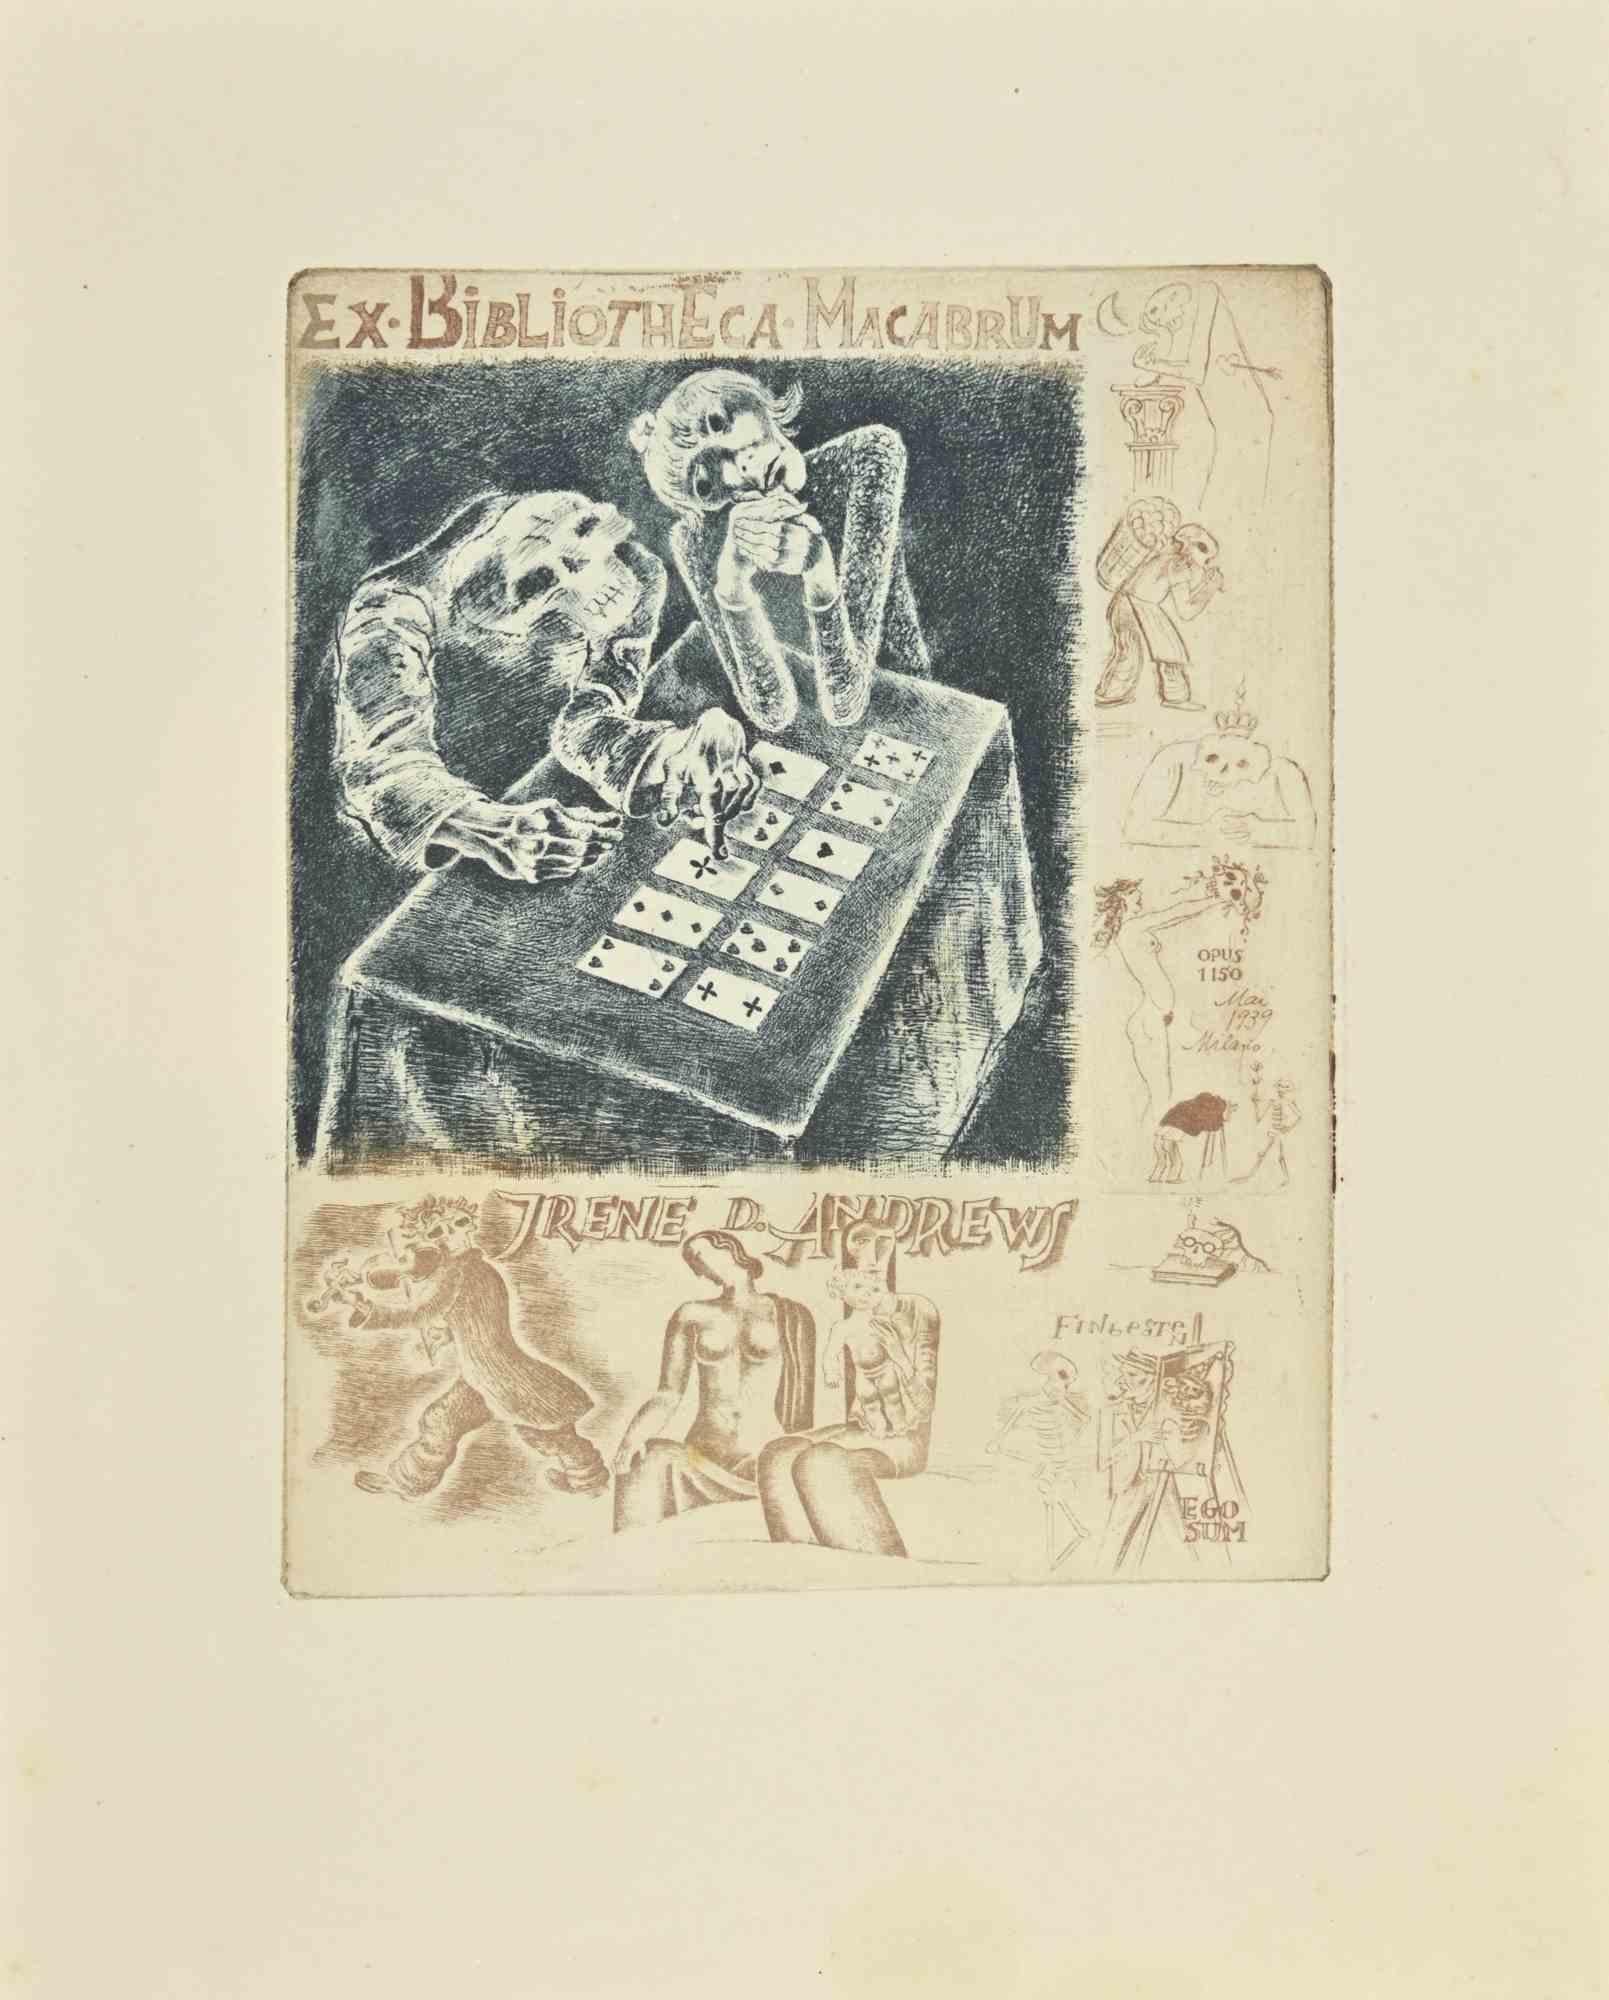 Ex Libris - Ex Bibliotheca Macabrum is an Etching print created by  Michel Fingesten in 1939.

Good conditions.

Michel Fingesten (1884 - 1943) was a Czech painter and engraver of Jewish origin. He is considered one of the greatest Ex Libris artists